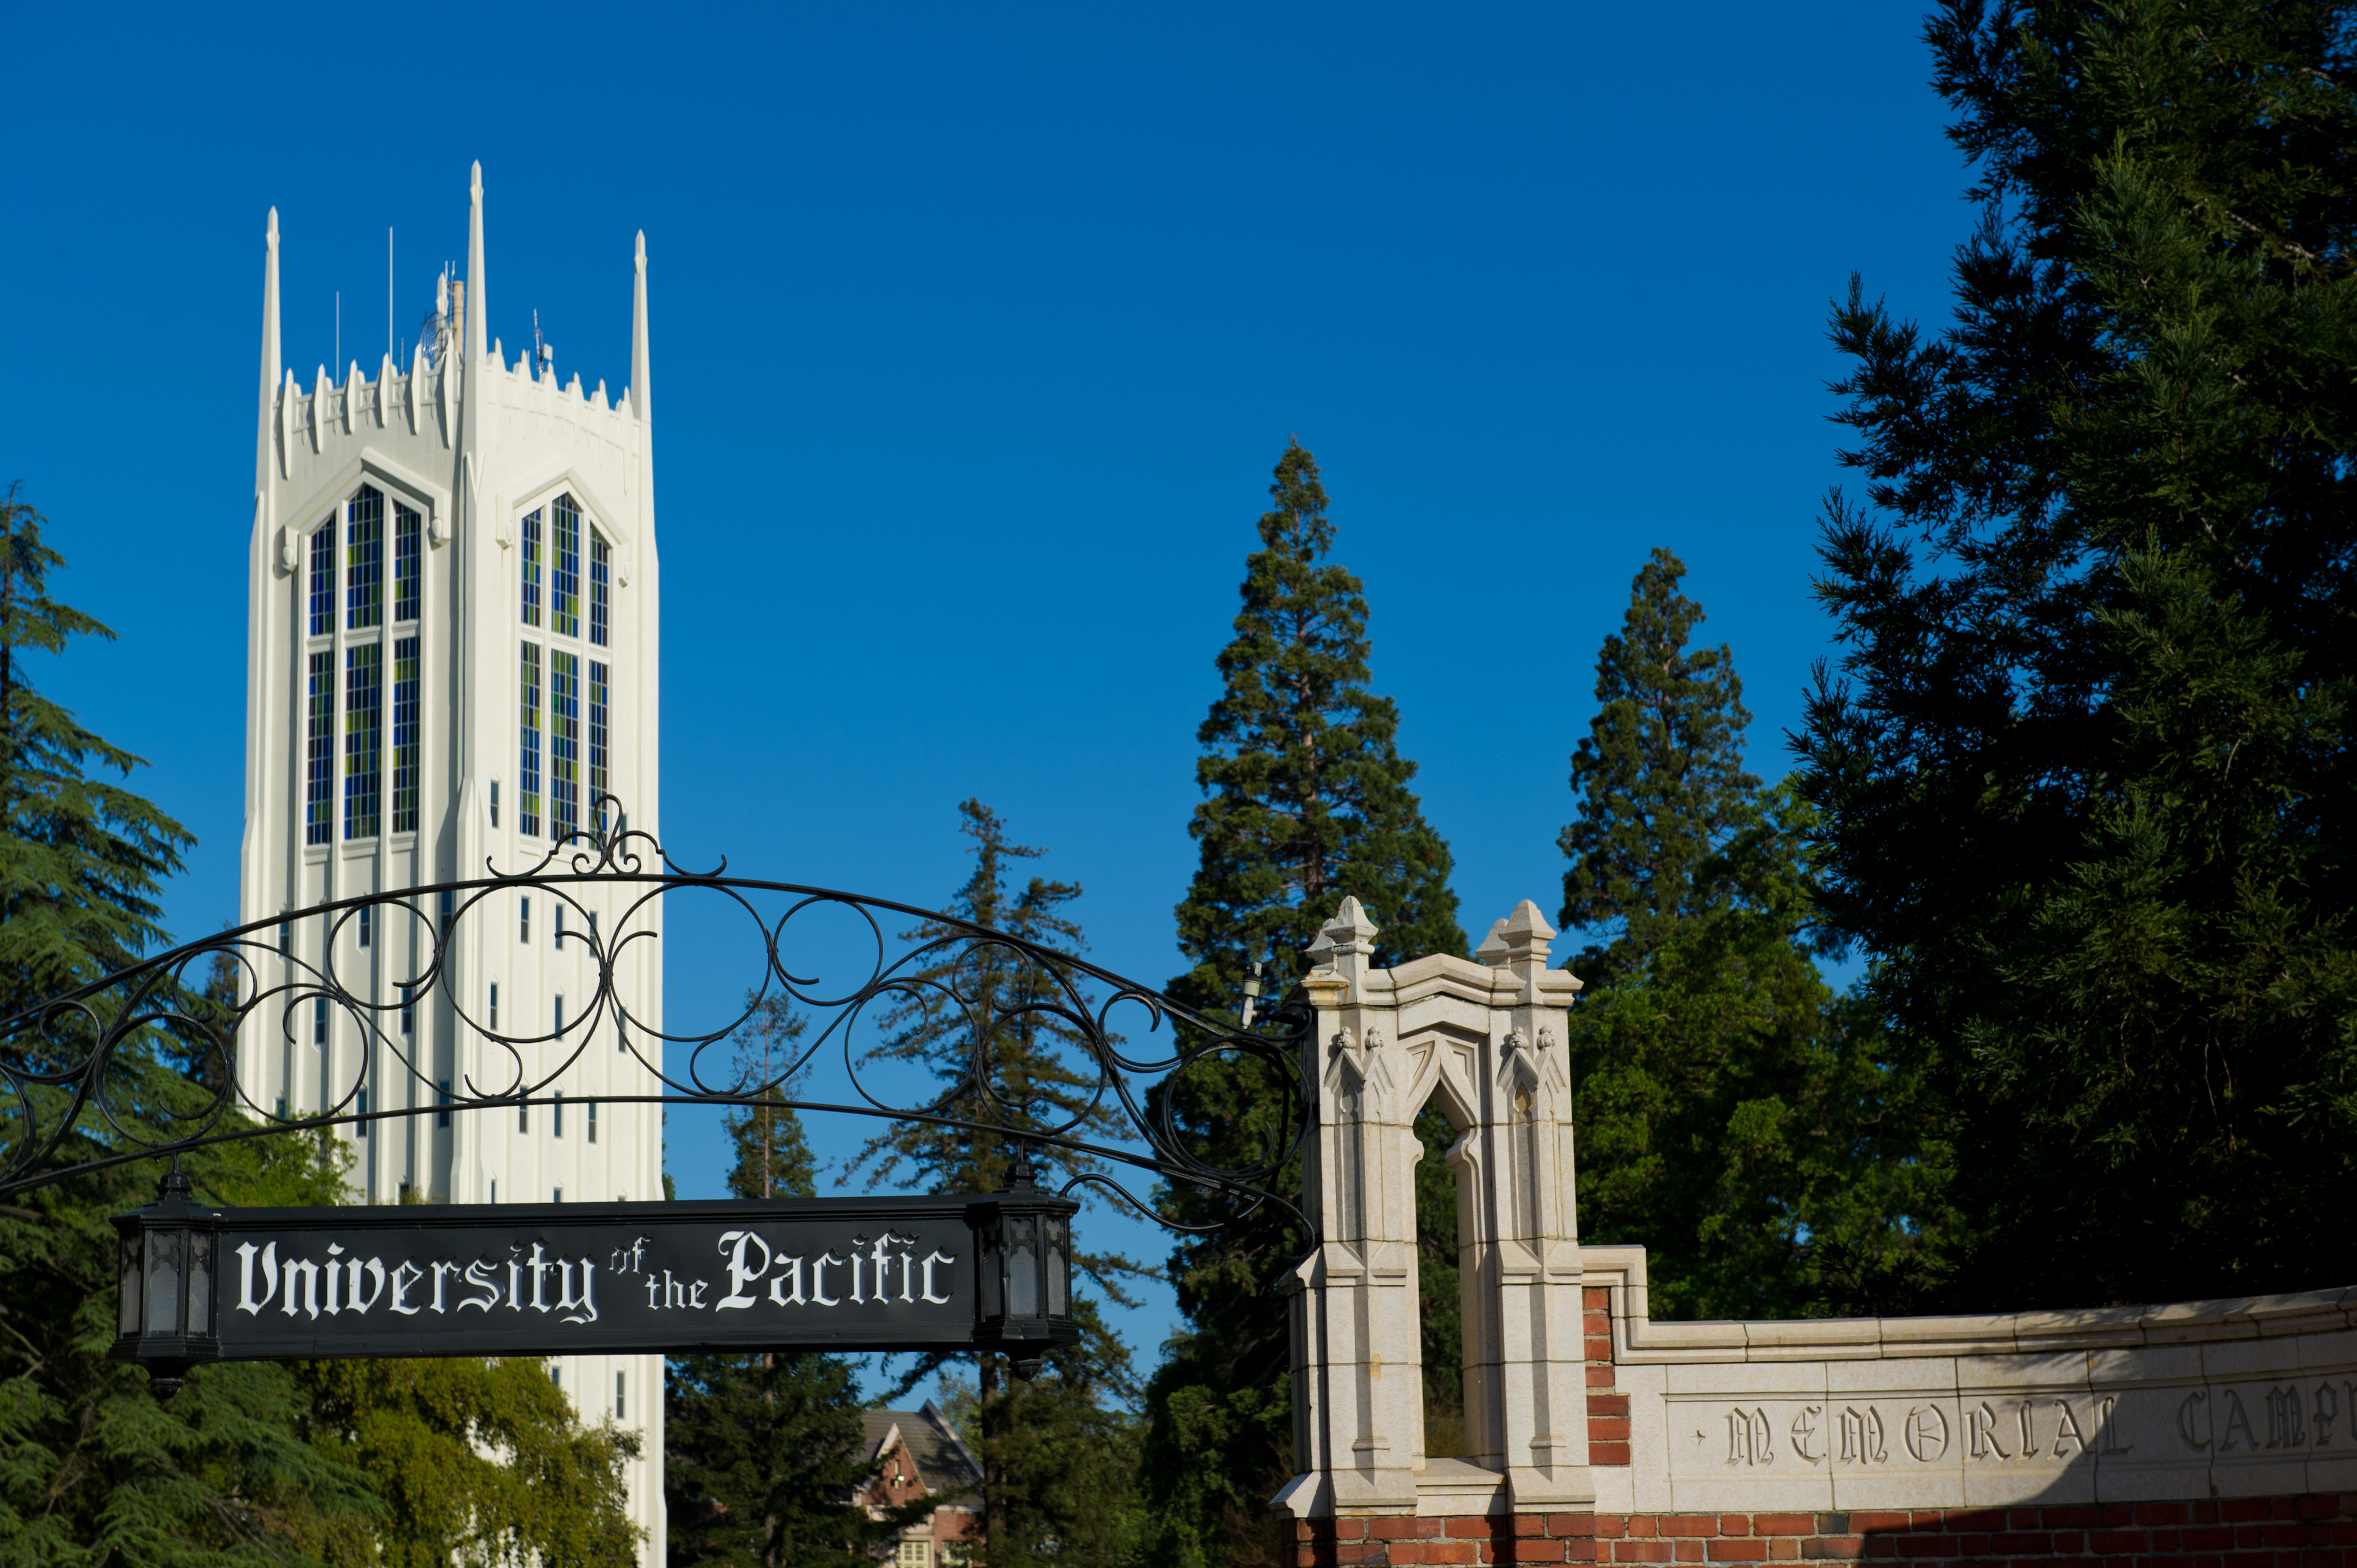 Pacific university. University of the Pacific. University of the Pacific (университет University of the Pacific) мероприятие. Pacific University of California. University of the Pacific ranking.